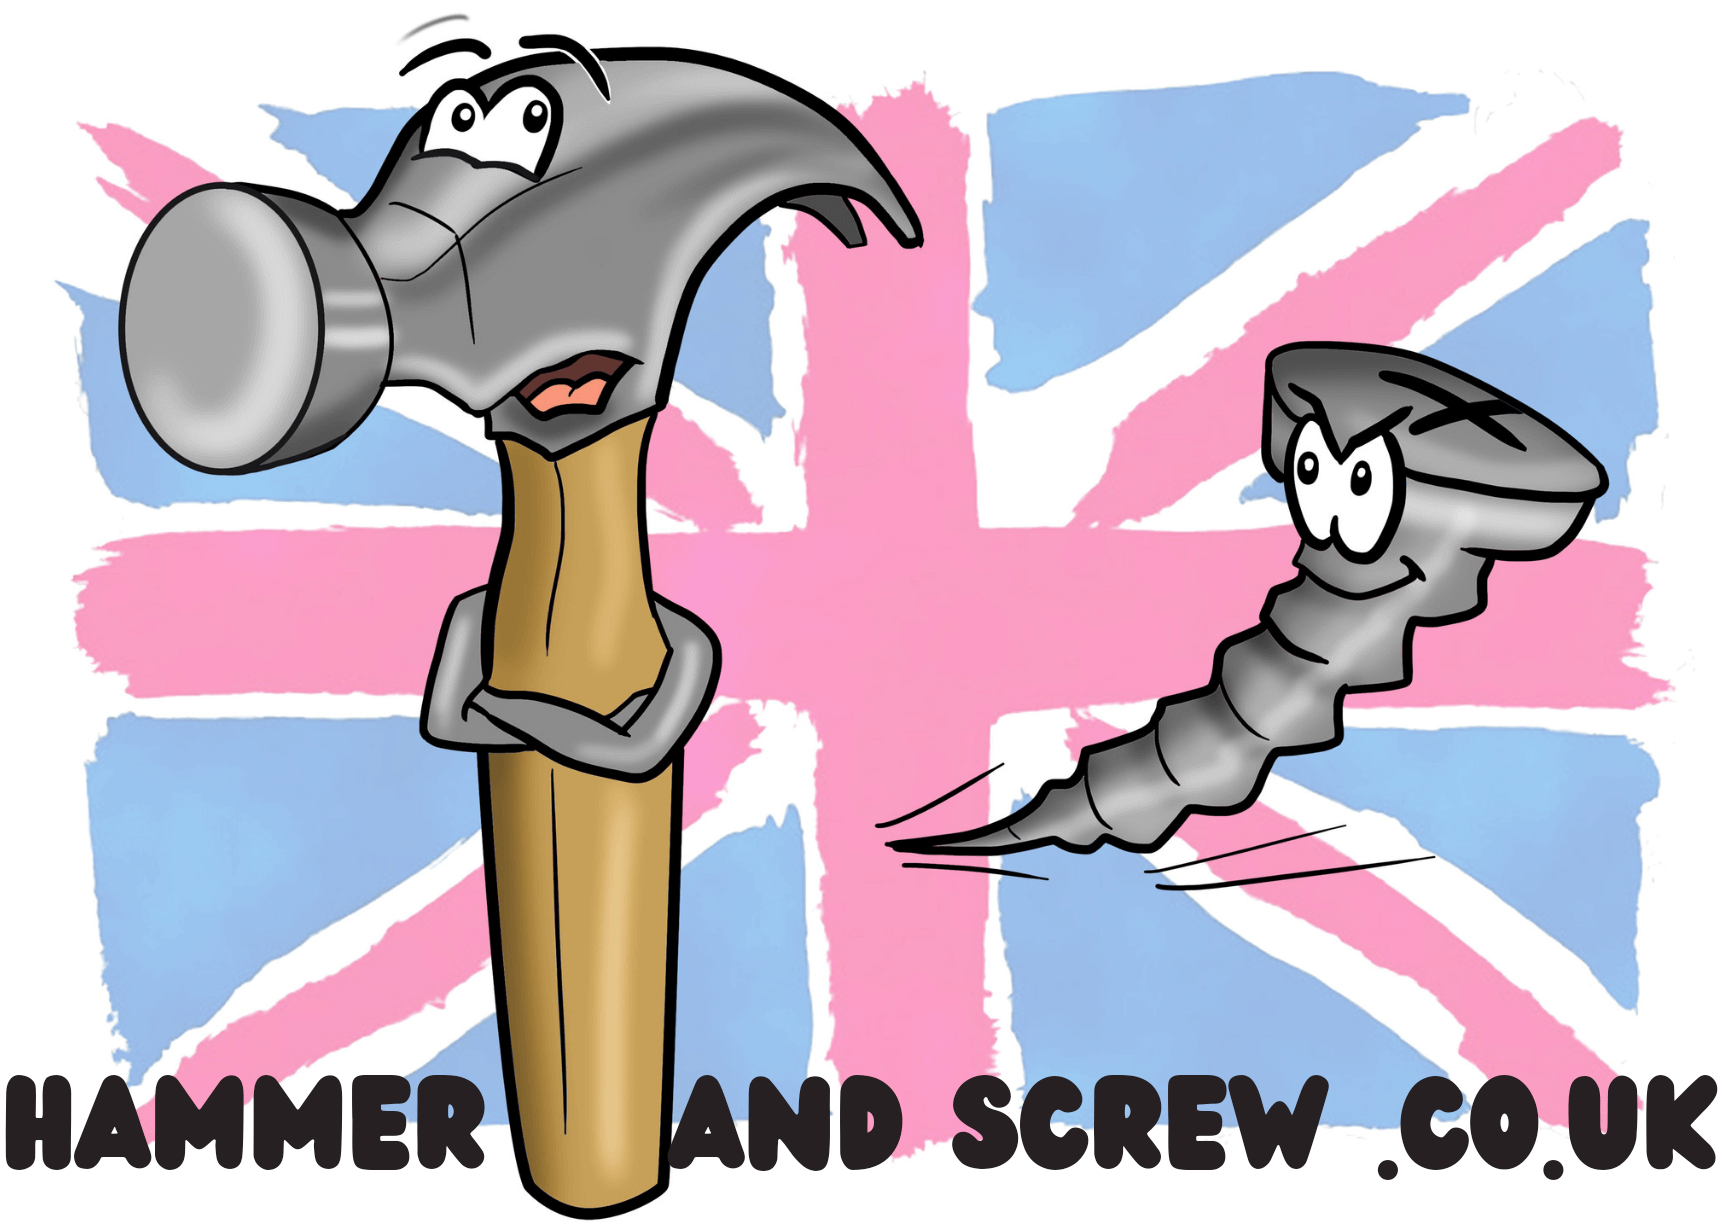 Hammer and Screw